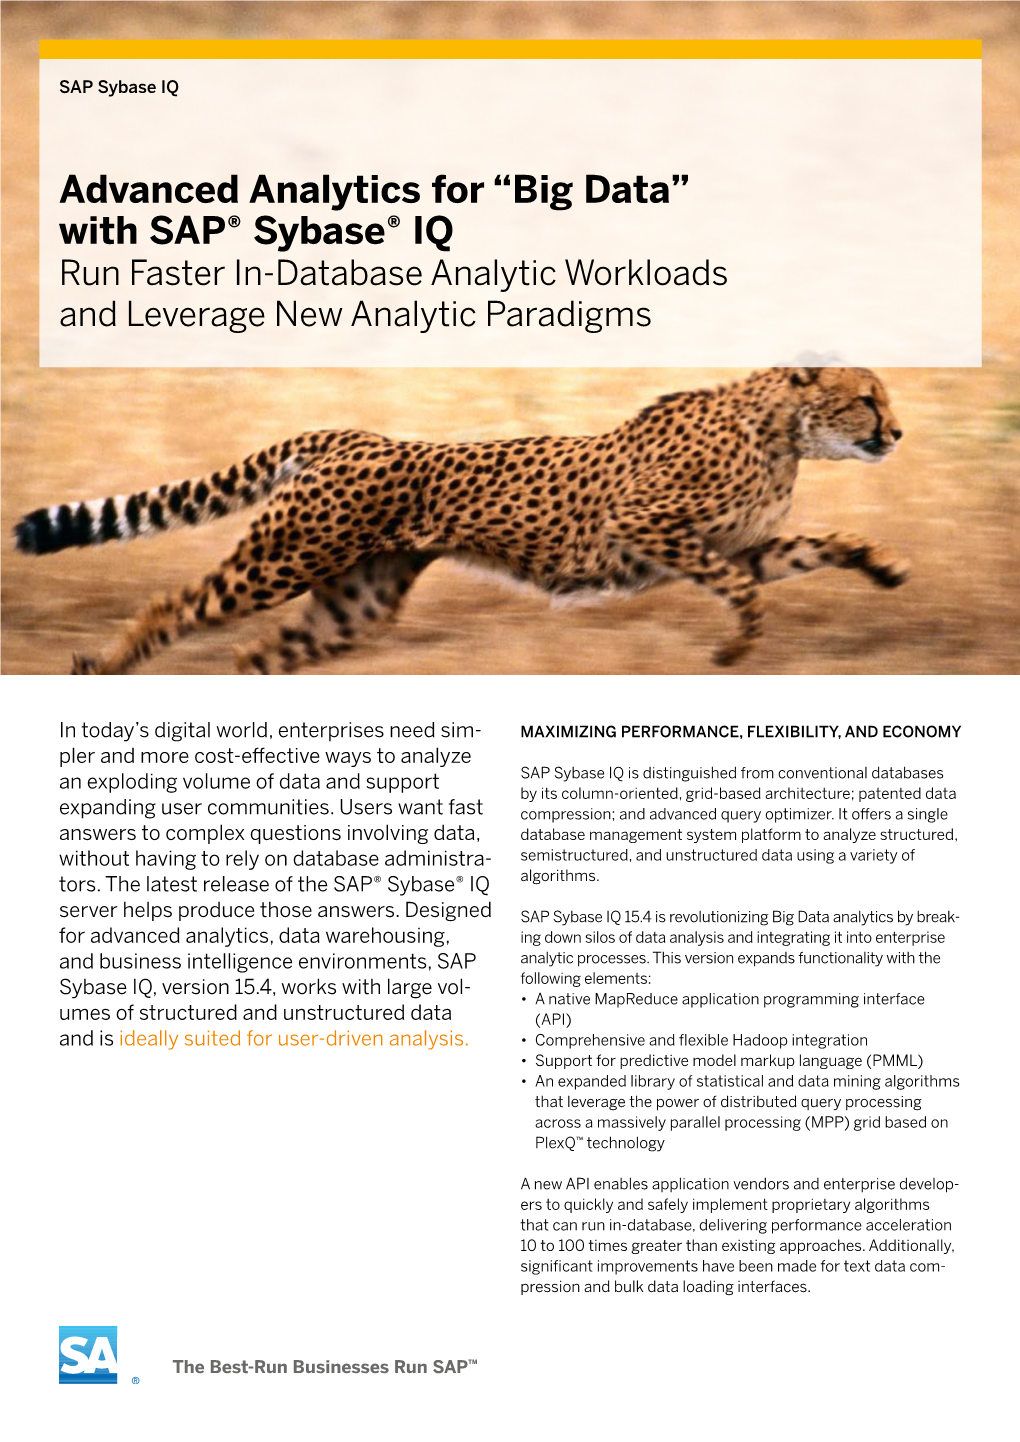 Advanced Analytics for “Big Data” with SAP® Sybase® IQ Run Faster In-Database Analytic Workloads and Leverage New Analytic Paradigms